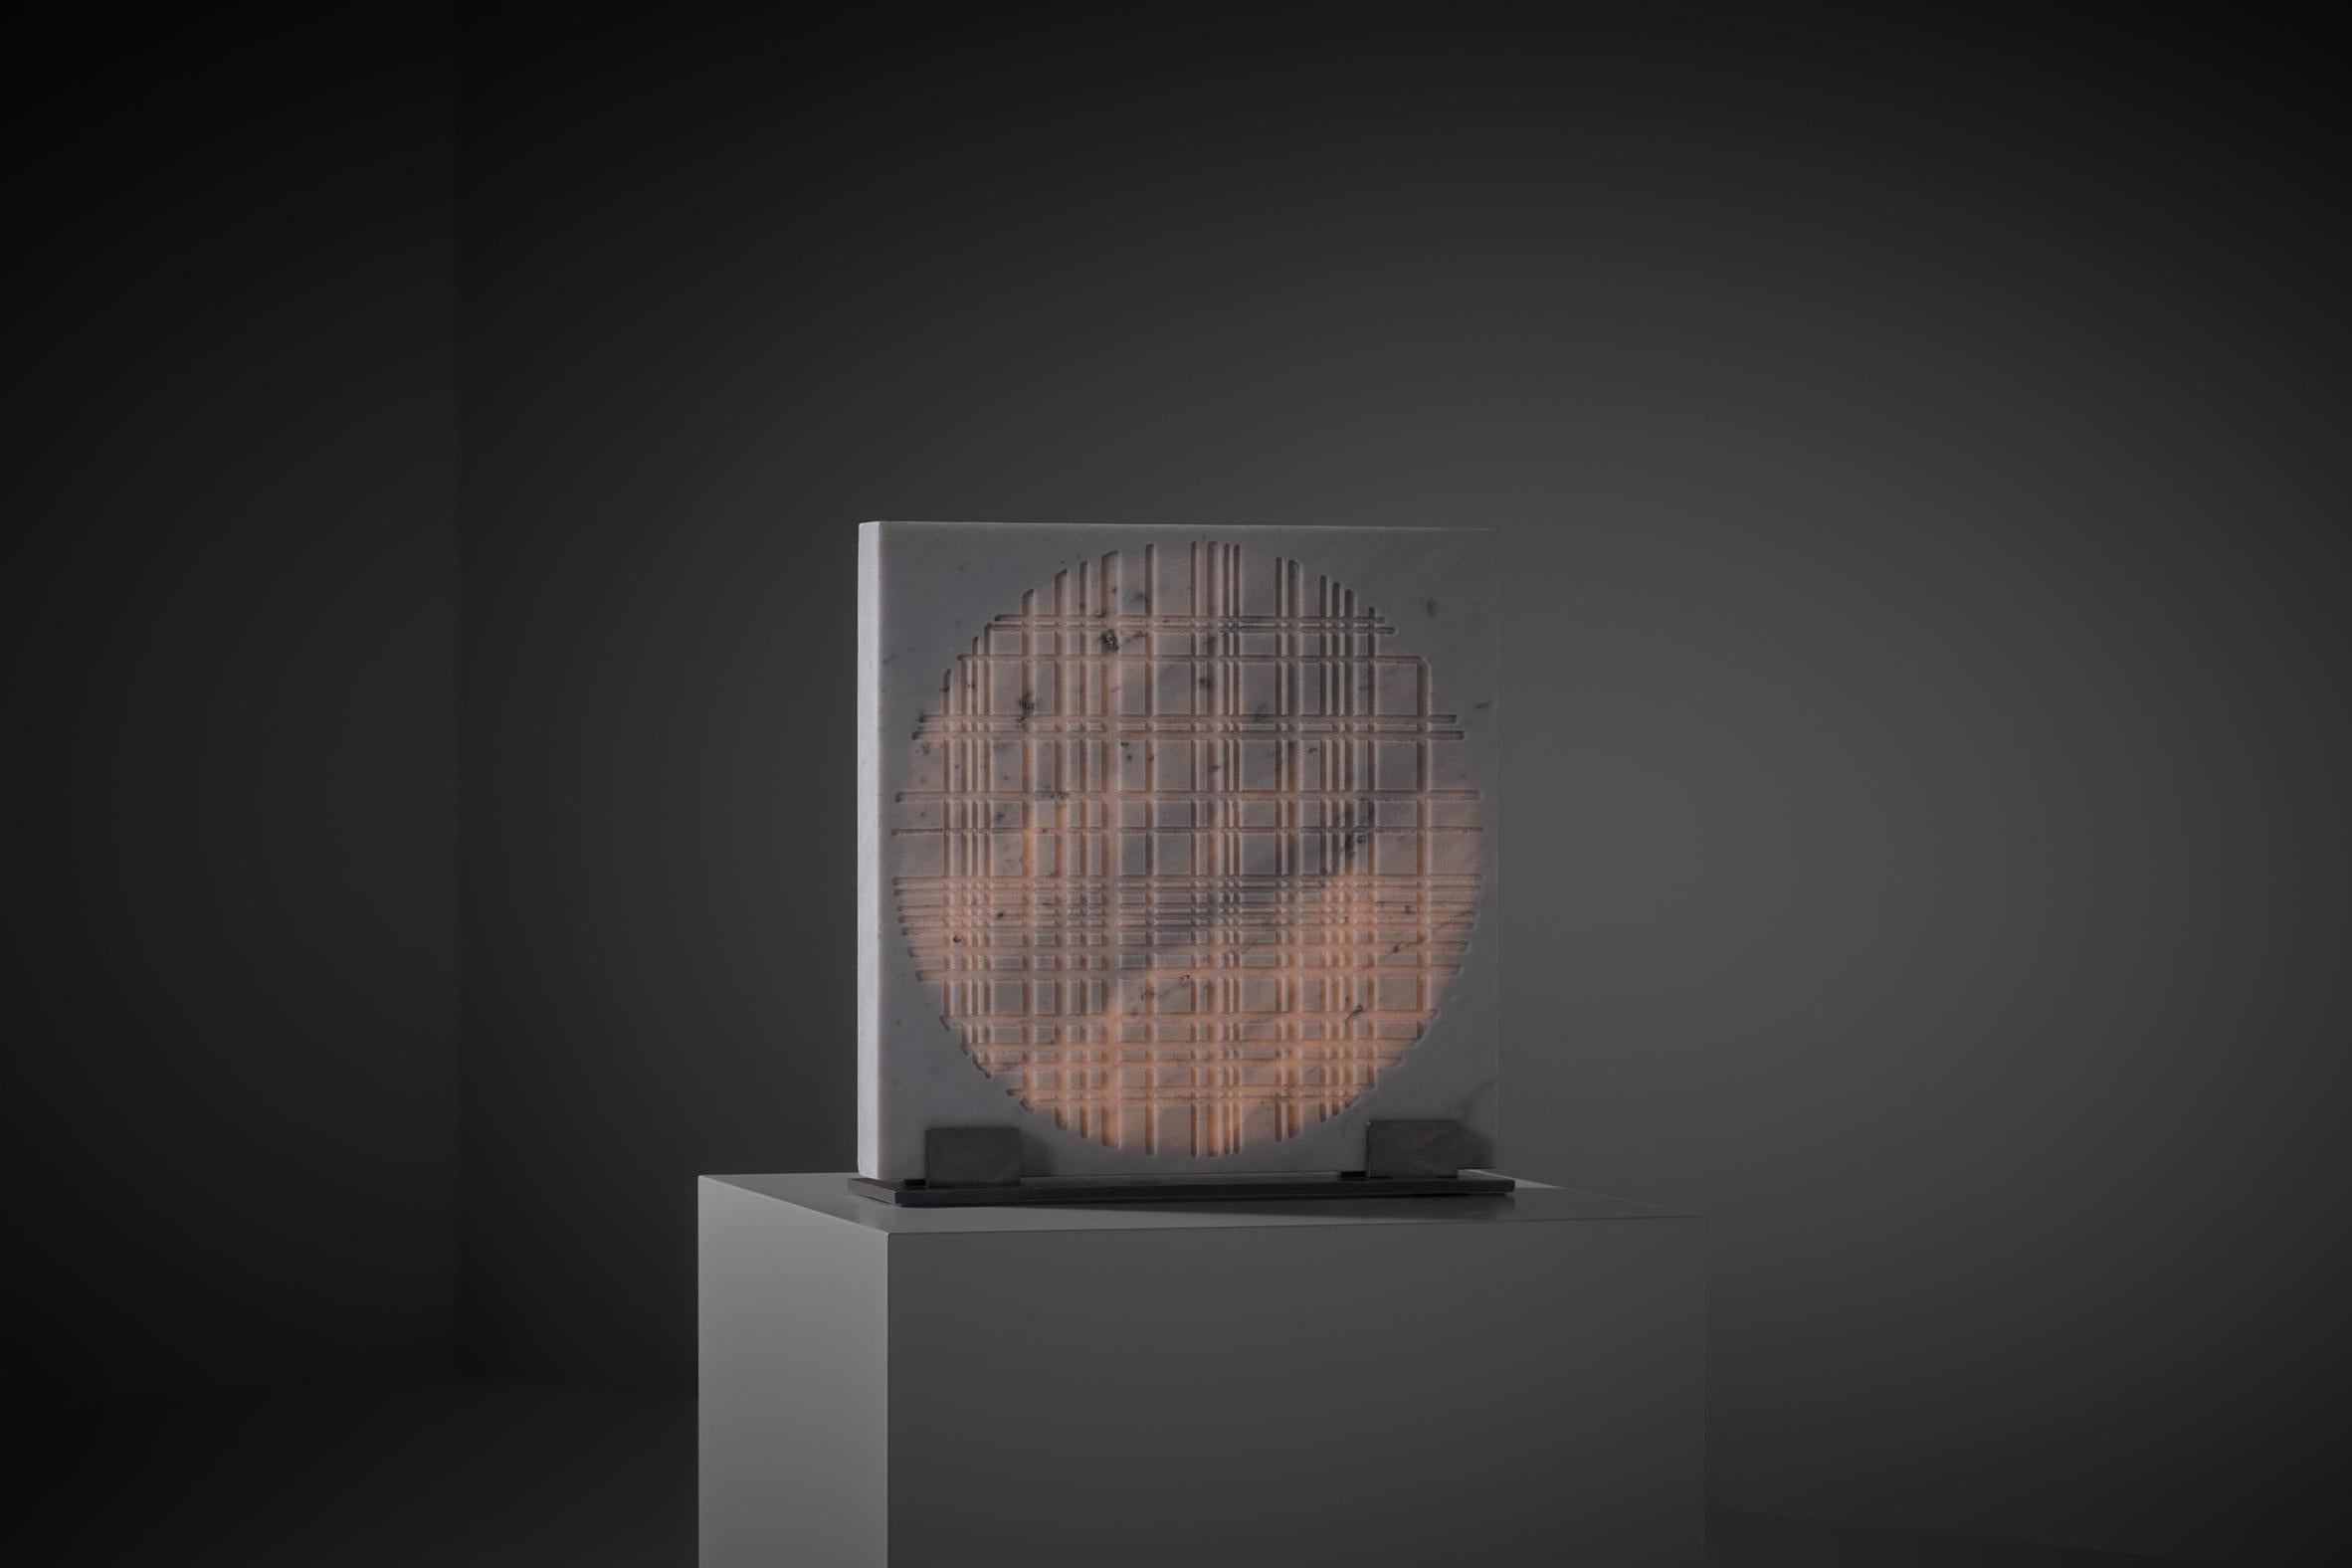 Rare 'C9 105 LP' marble light sculpture by Nerone & Patuzzi for Forme e Superfici, Italy 1970s. The lamp is crafted out of solid Carrara marble showing an artistic engraved graphic line pattern, illuminated from the inside creating an artistic and